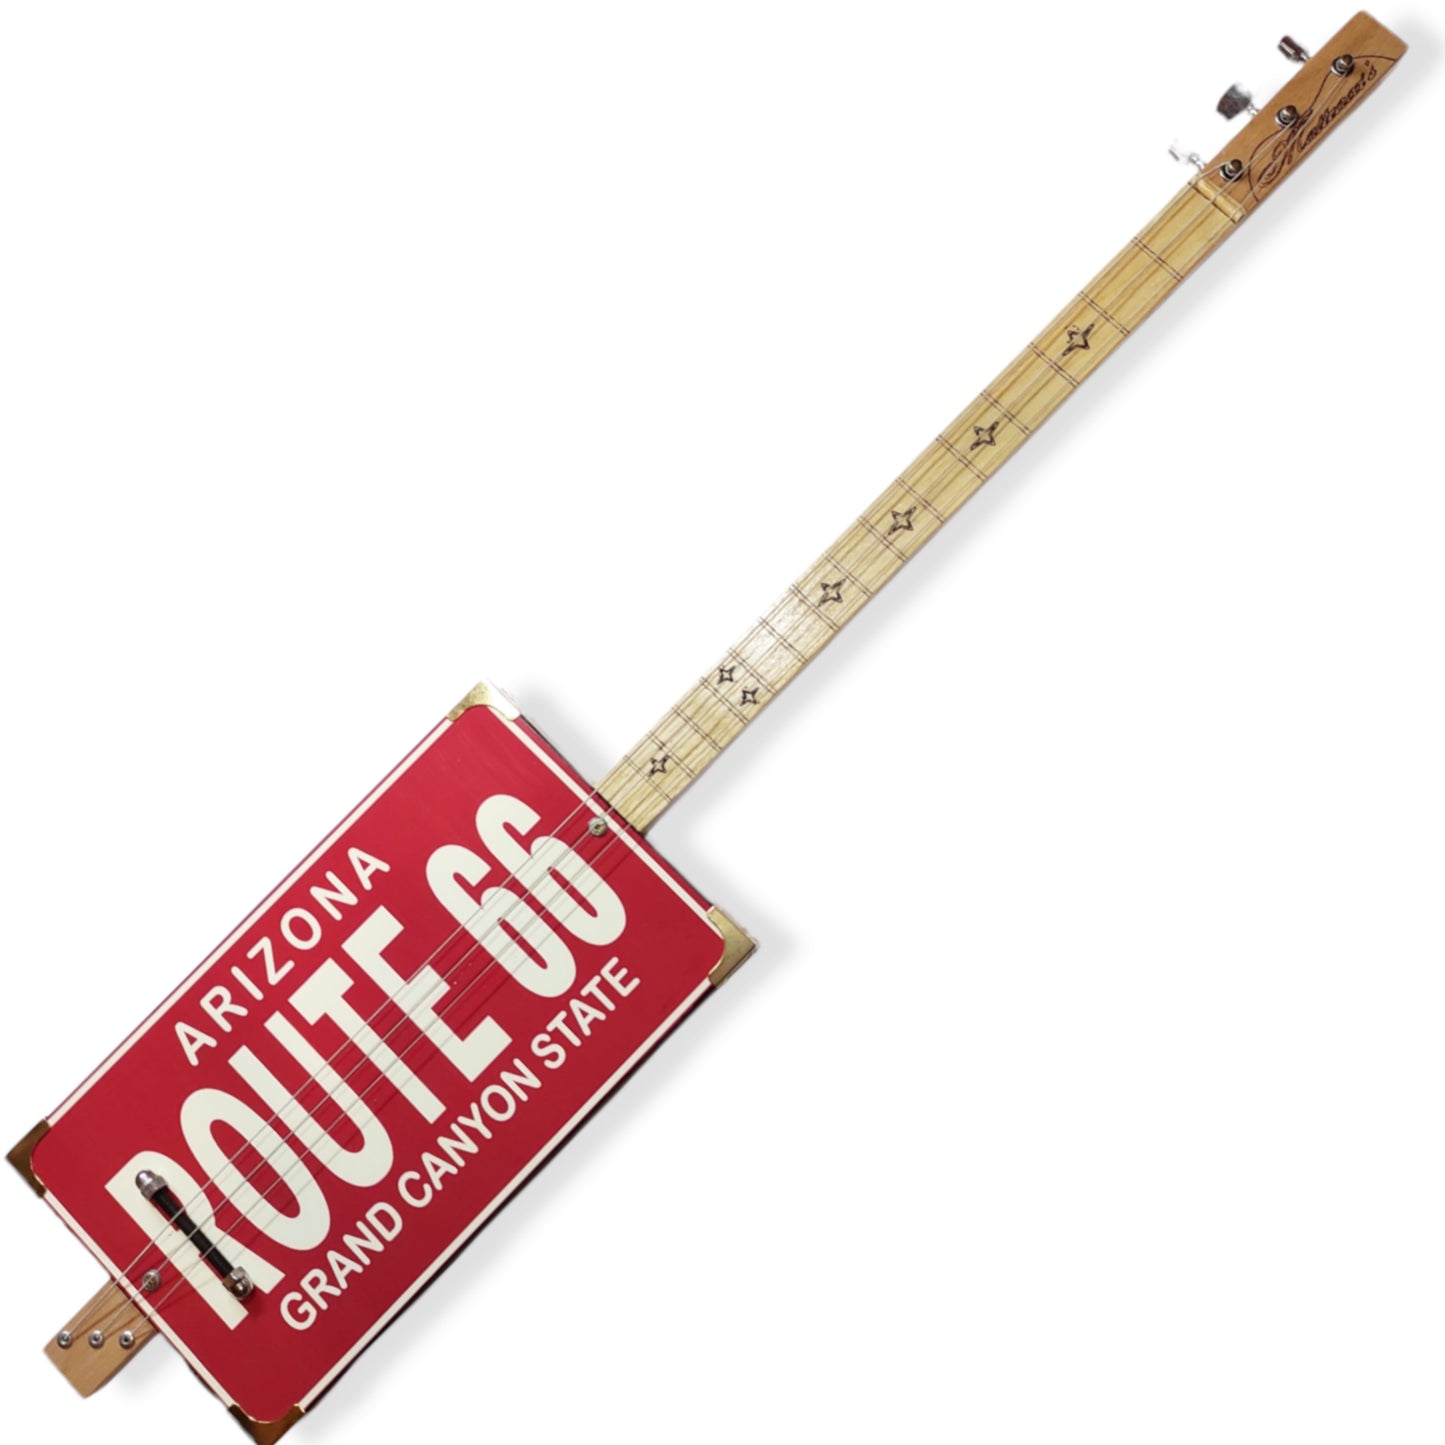 Route 66 3sp cigar box guitar Matteacci's Made in Italy